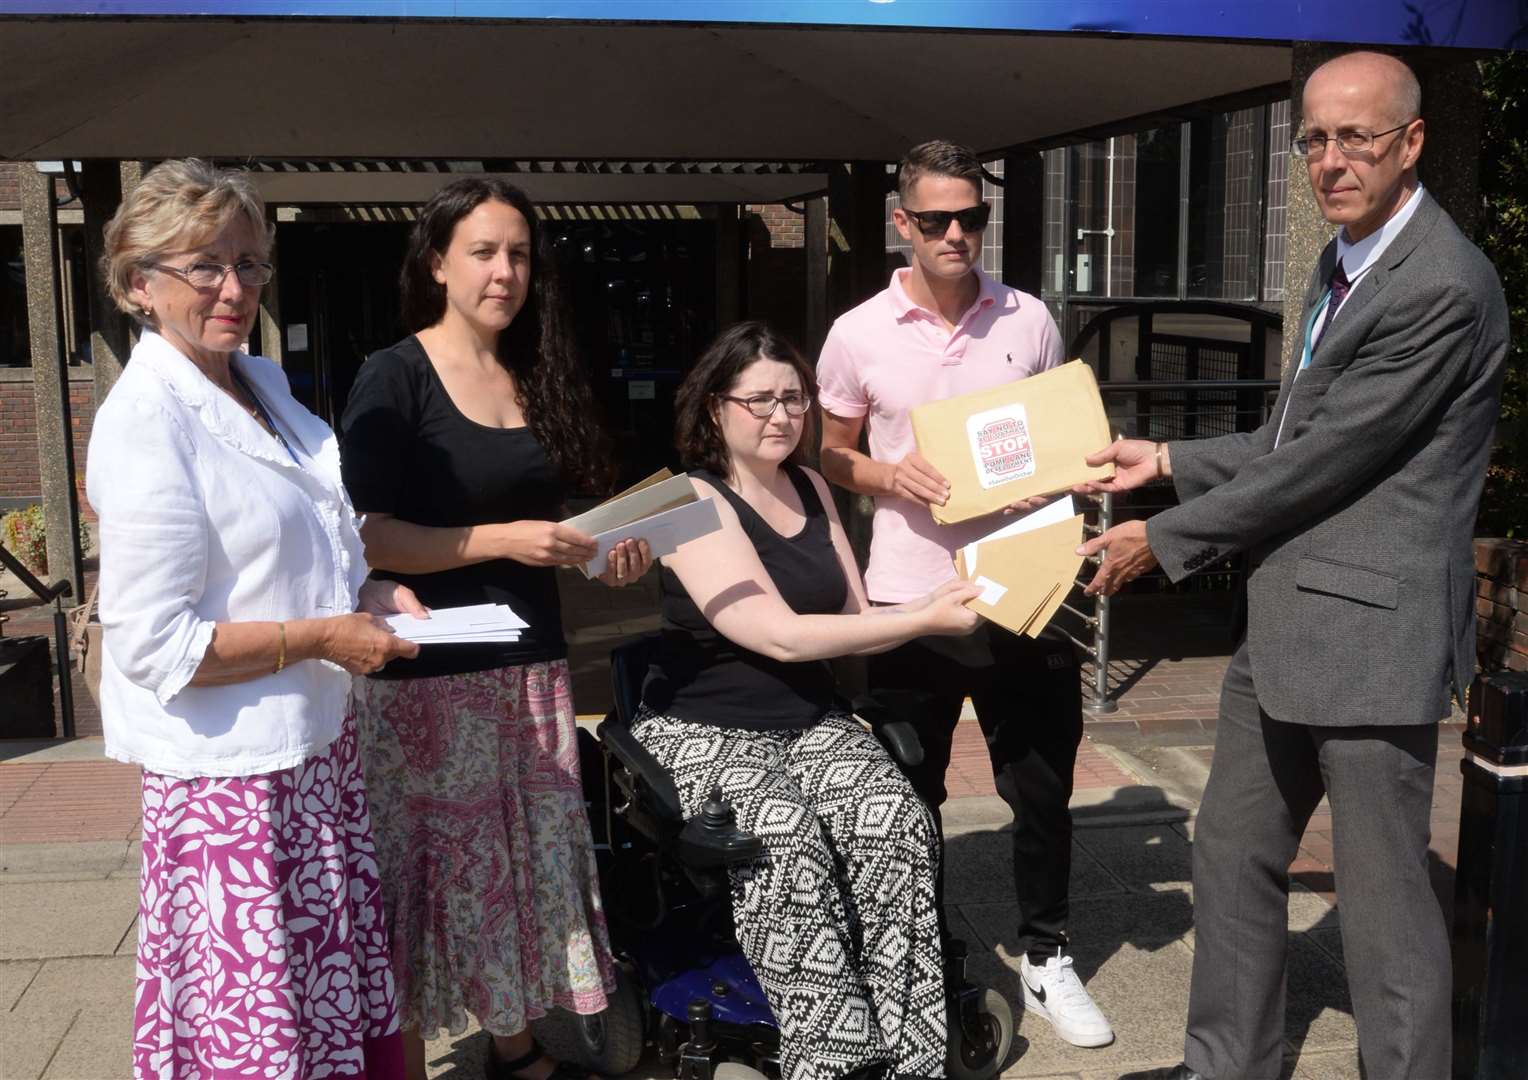 Cllr Kristine Carr, Catriona Jamison, Kate Belmonte and Cllr Martin Potter hand over petitions to Dave Harris, head of planning at Medway Council, over the proposed Pump Lane housing development. Picture: Chris Davey